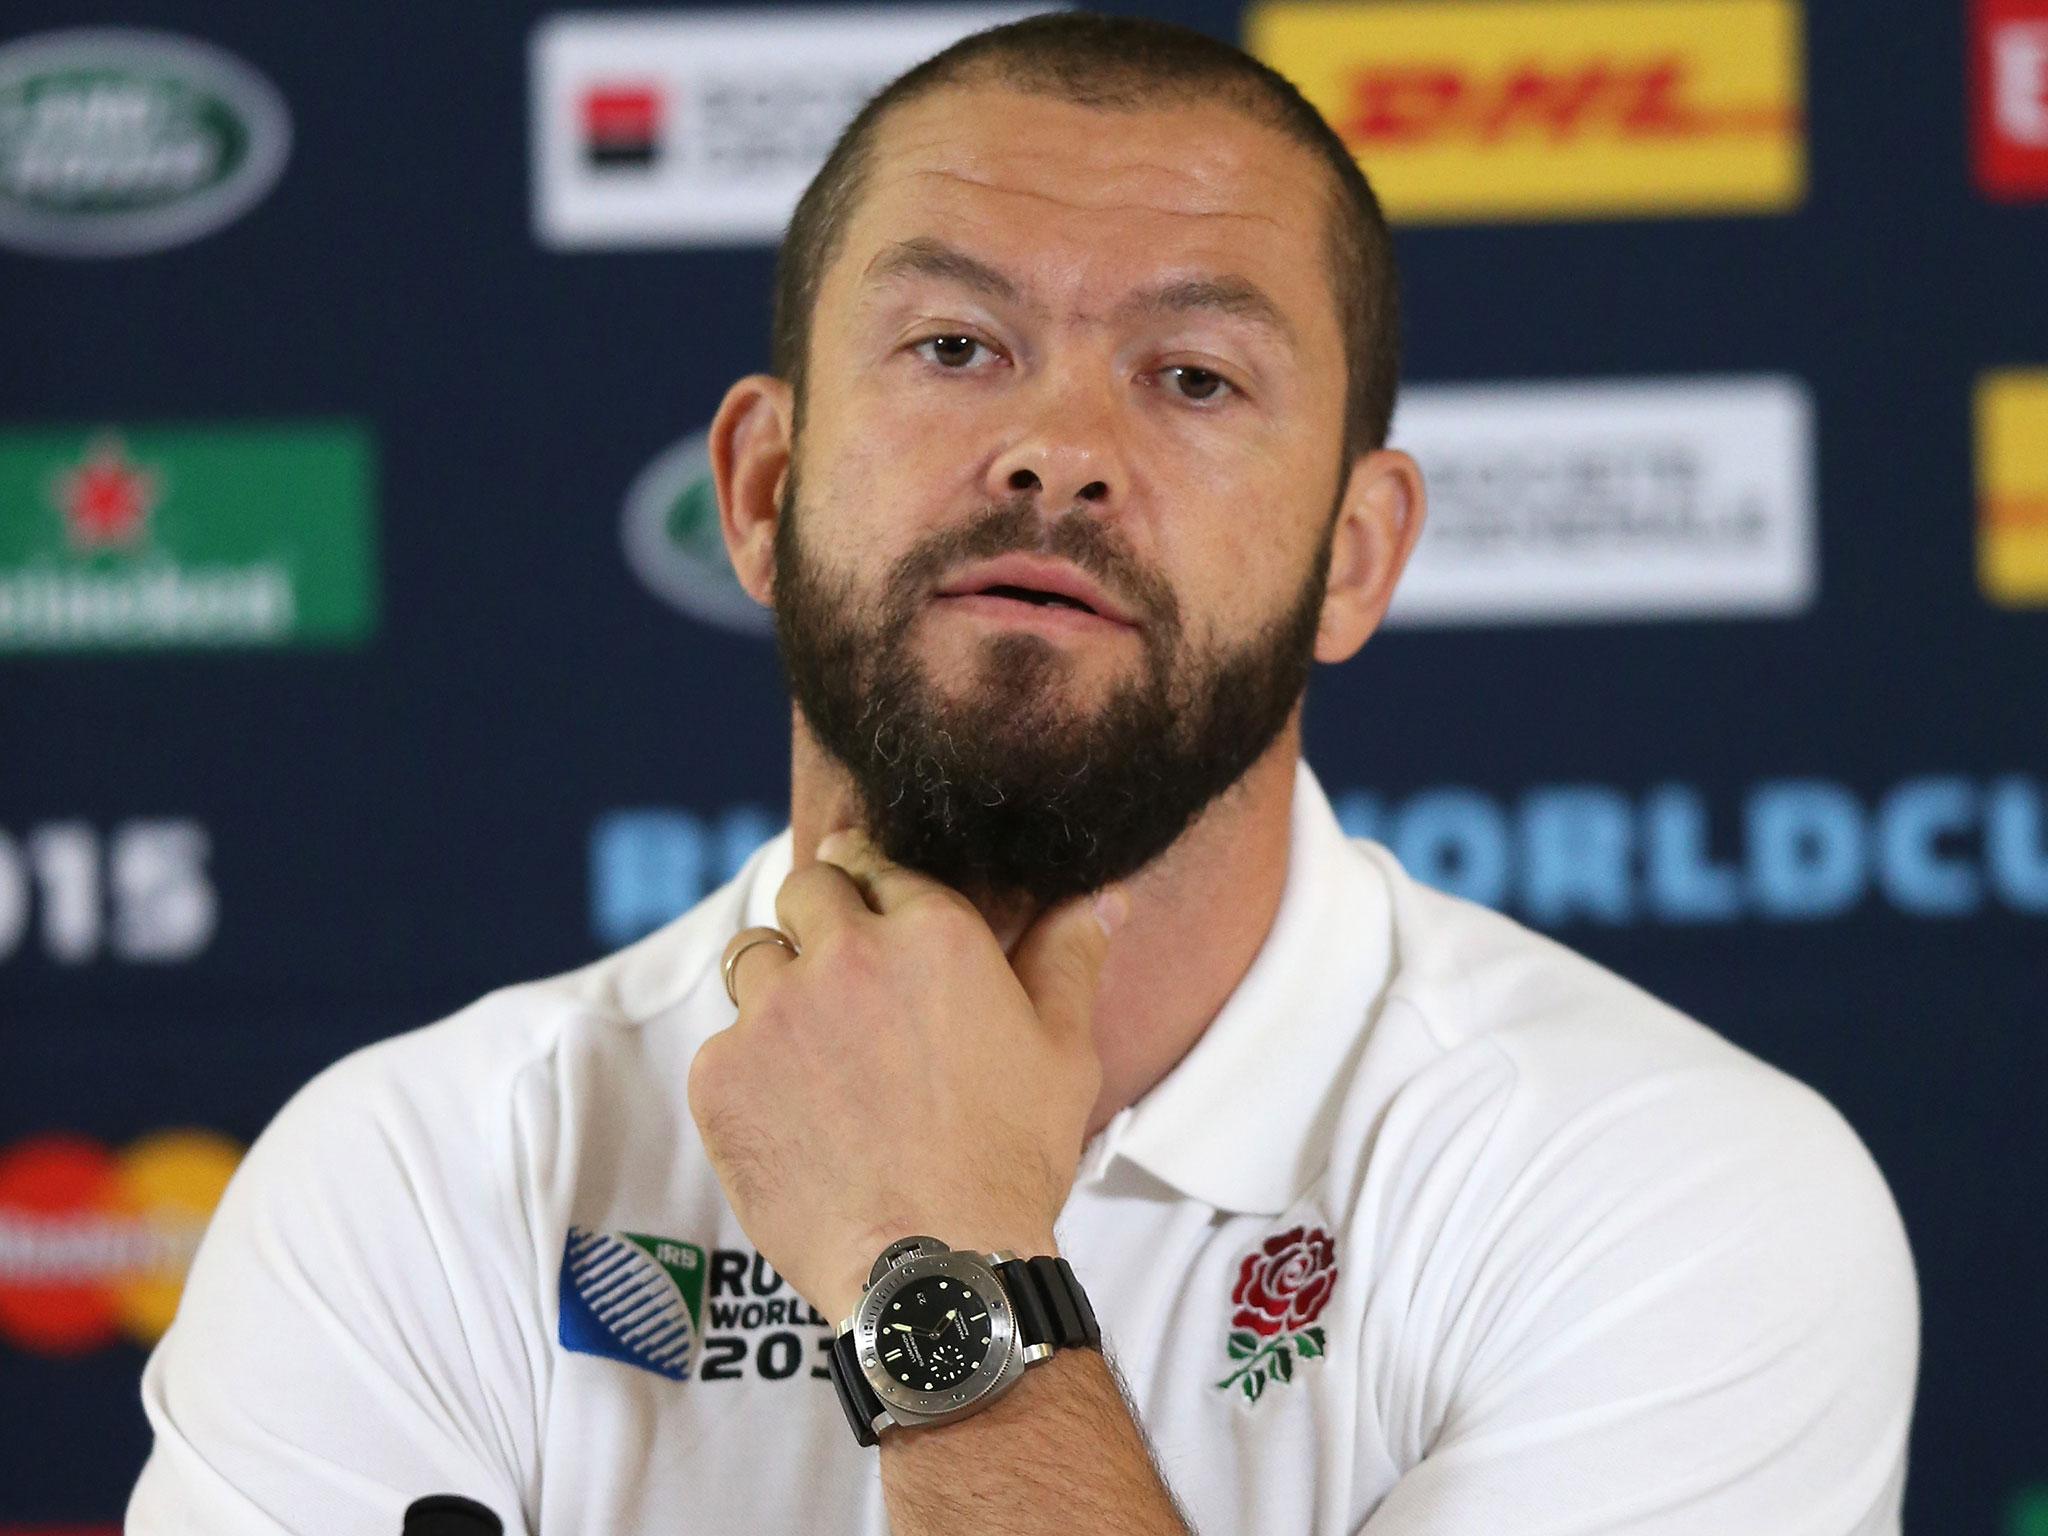 Andy Farrell was let go by the RFU three years ago but has developed into a highly-rated coach